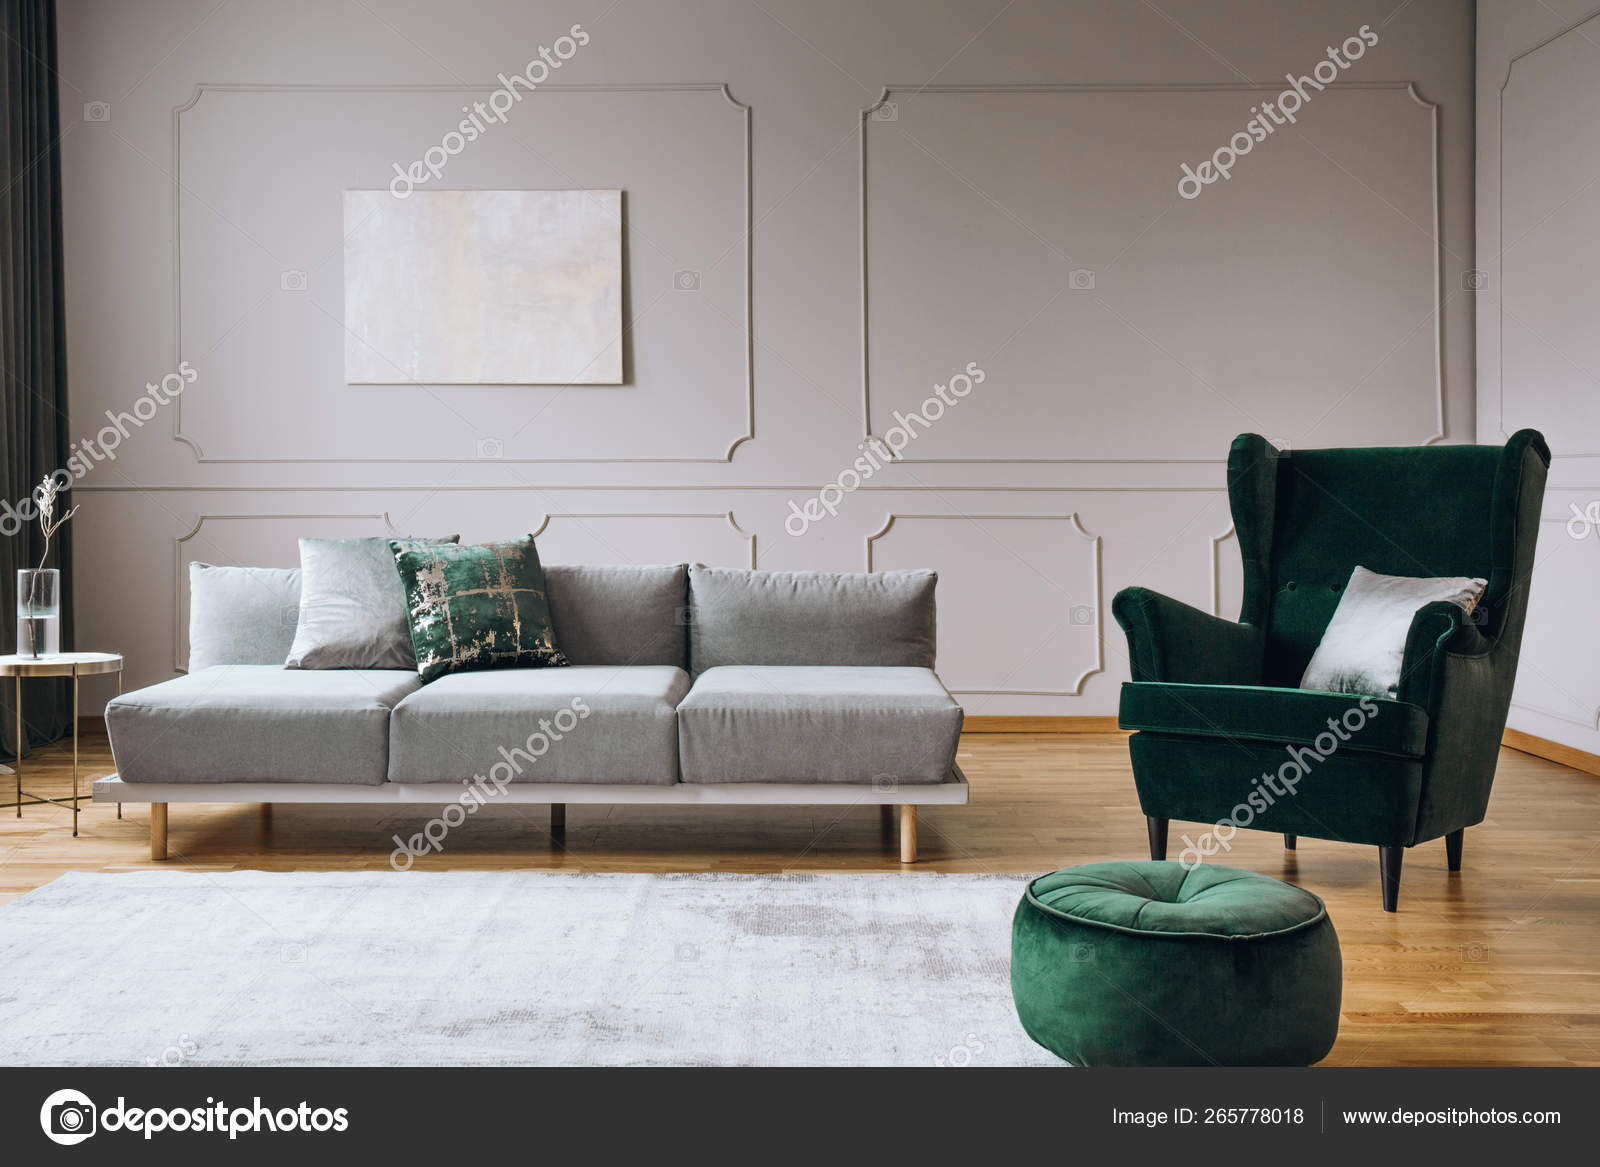 grey couch green pillows